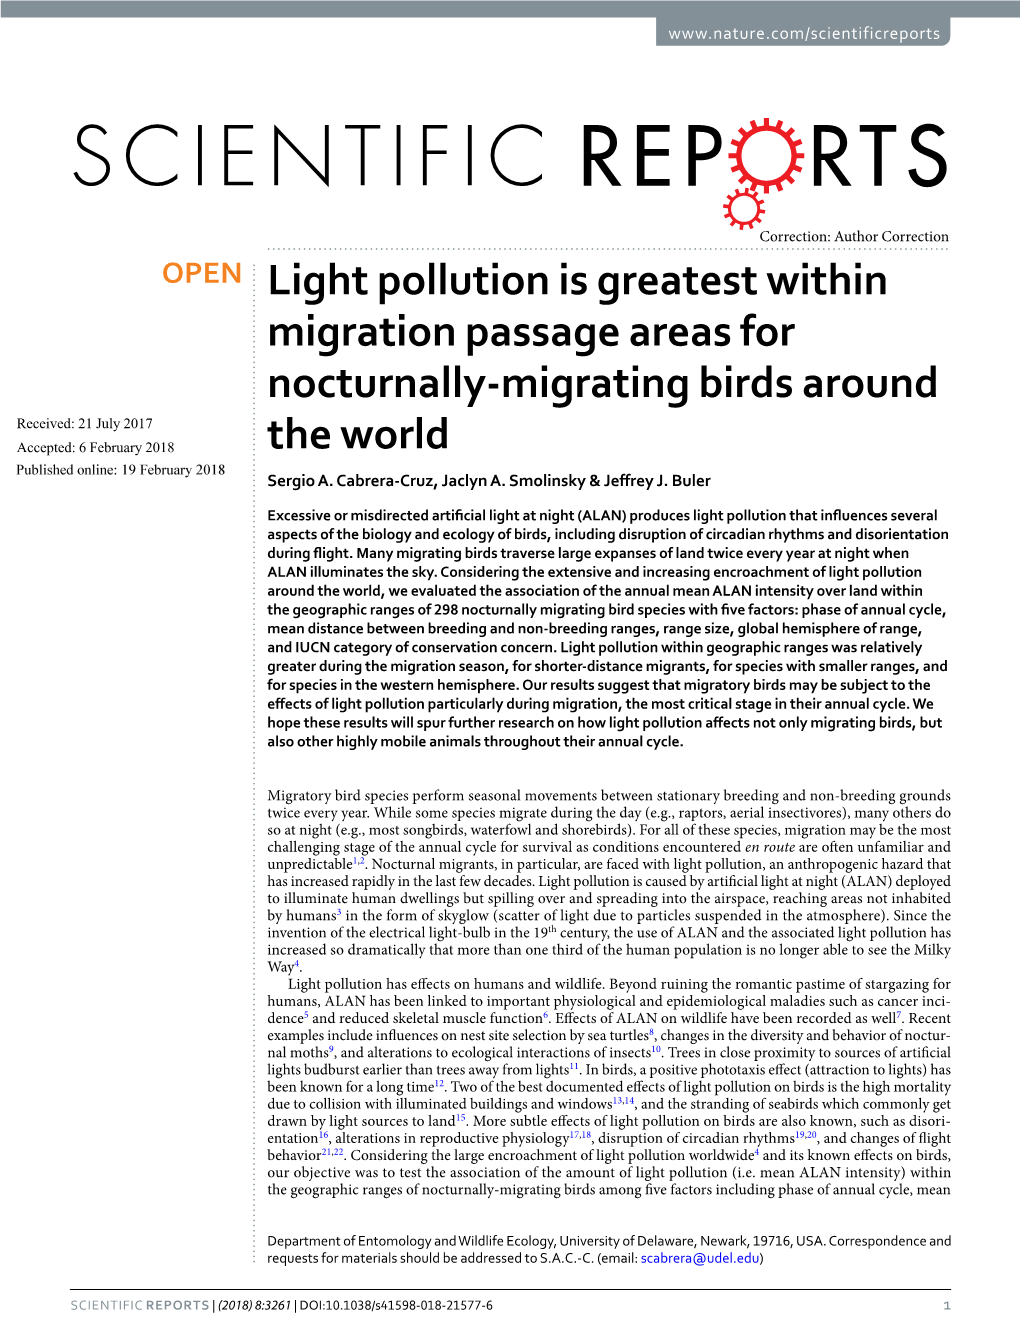 Light Pollution Is Greatest Within Migration Passage Areas